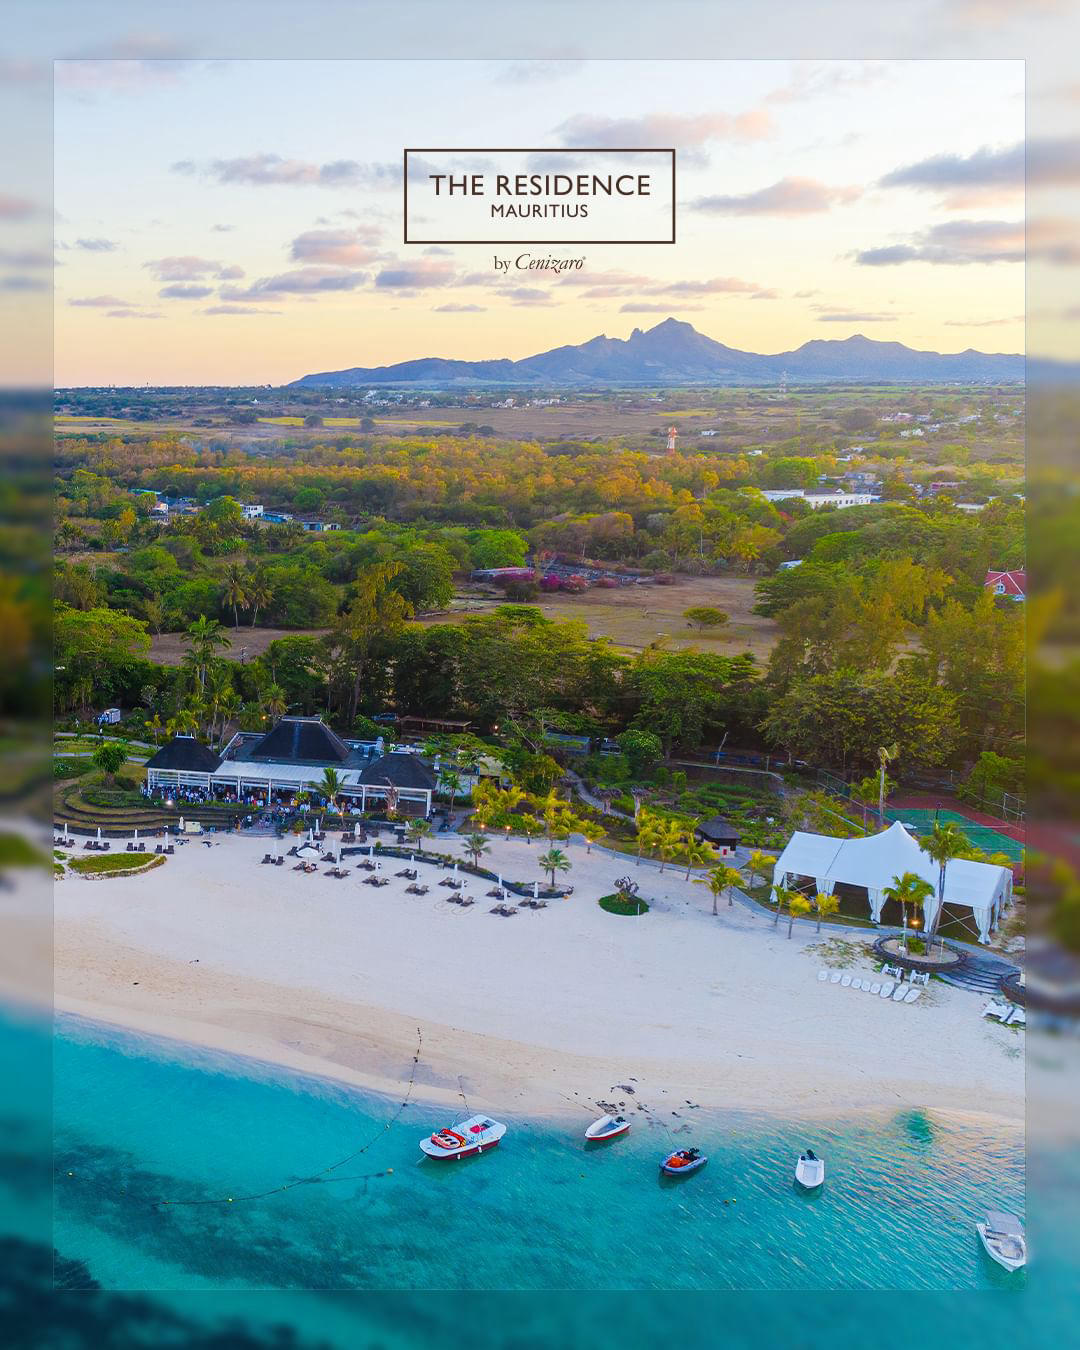 The Residence Mauritius enjoys one of the most stunning locations on the island, with views across S